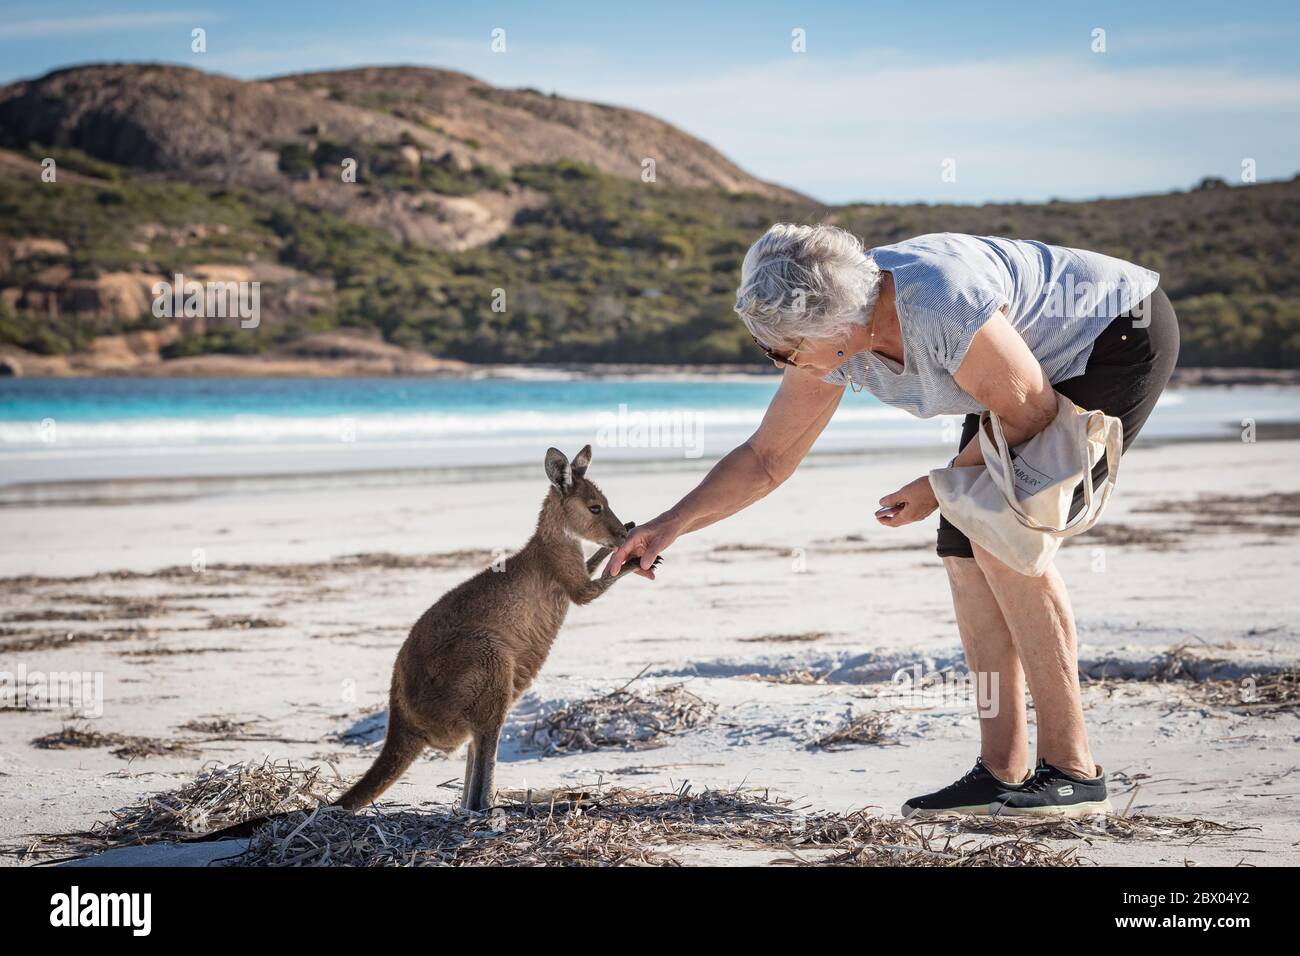 Lucky Bay Western Australia November 12th 2019 : A tourist being greeted by a kangaroo on the beach at Lucky Bay Stock Photo